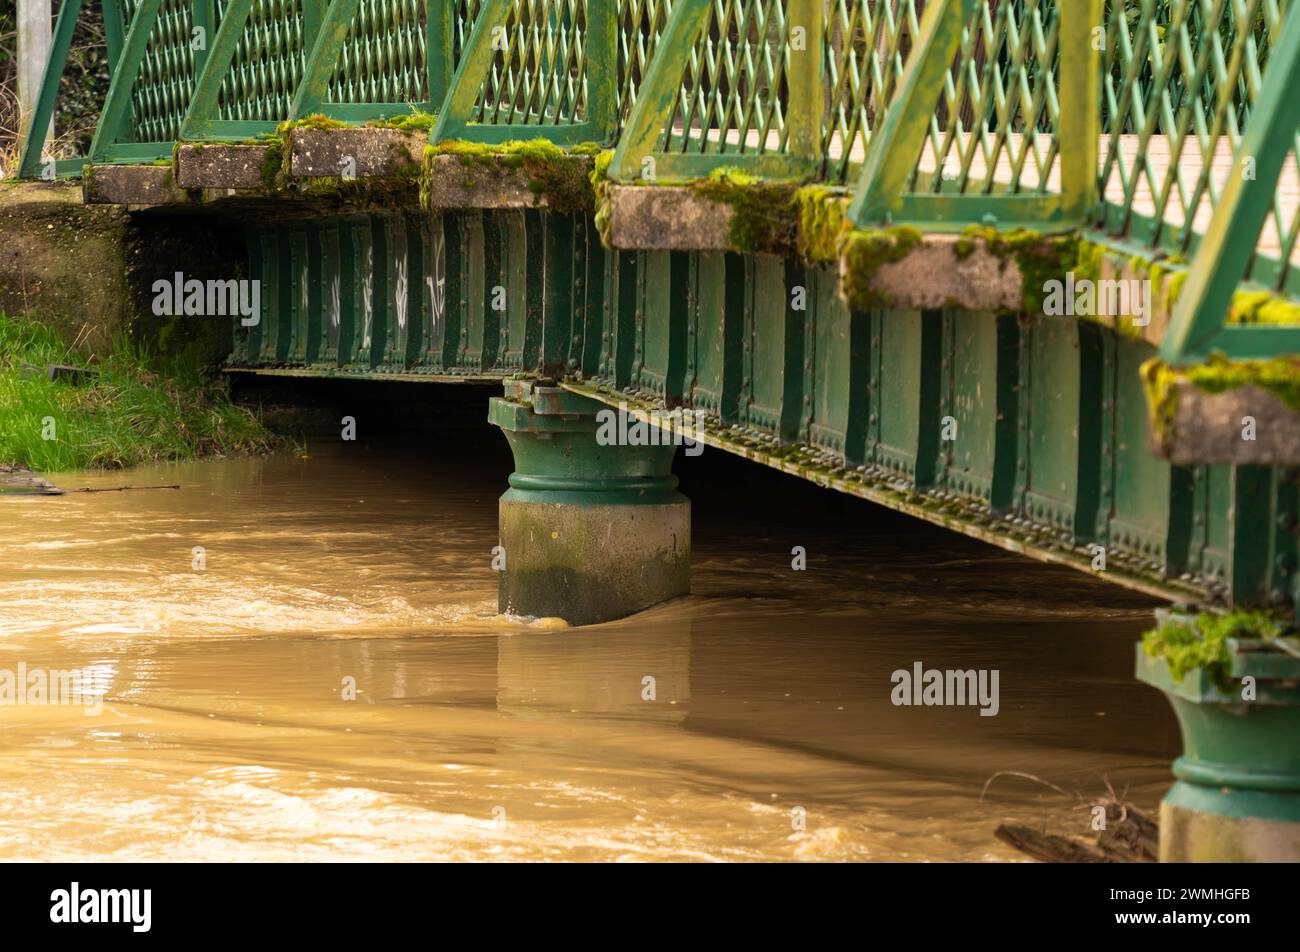 River Witham, bridge, Boultham Park, link Russell Street, Newark Road, in flood, brown waters, fast current, structure under pressure, green cast iron Stock Photo